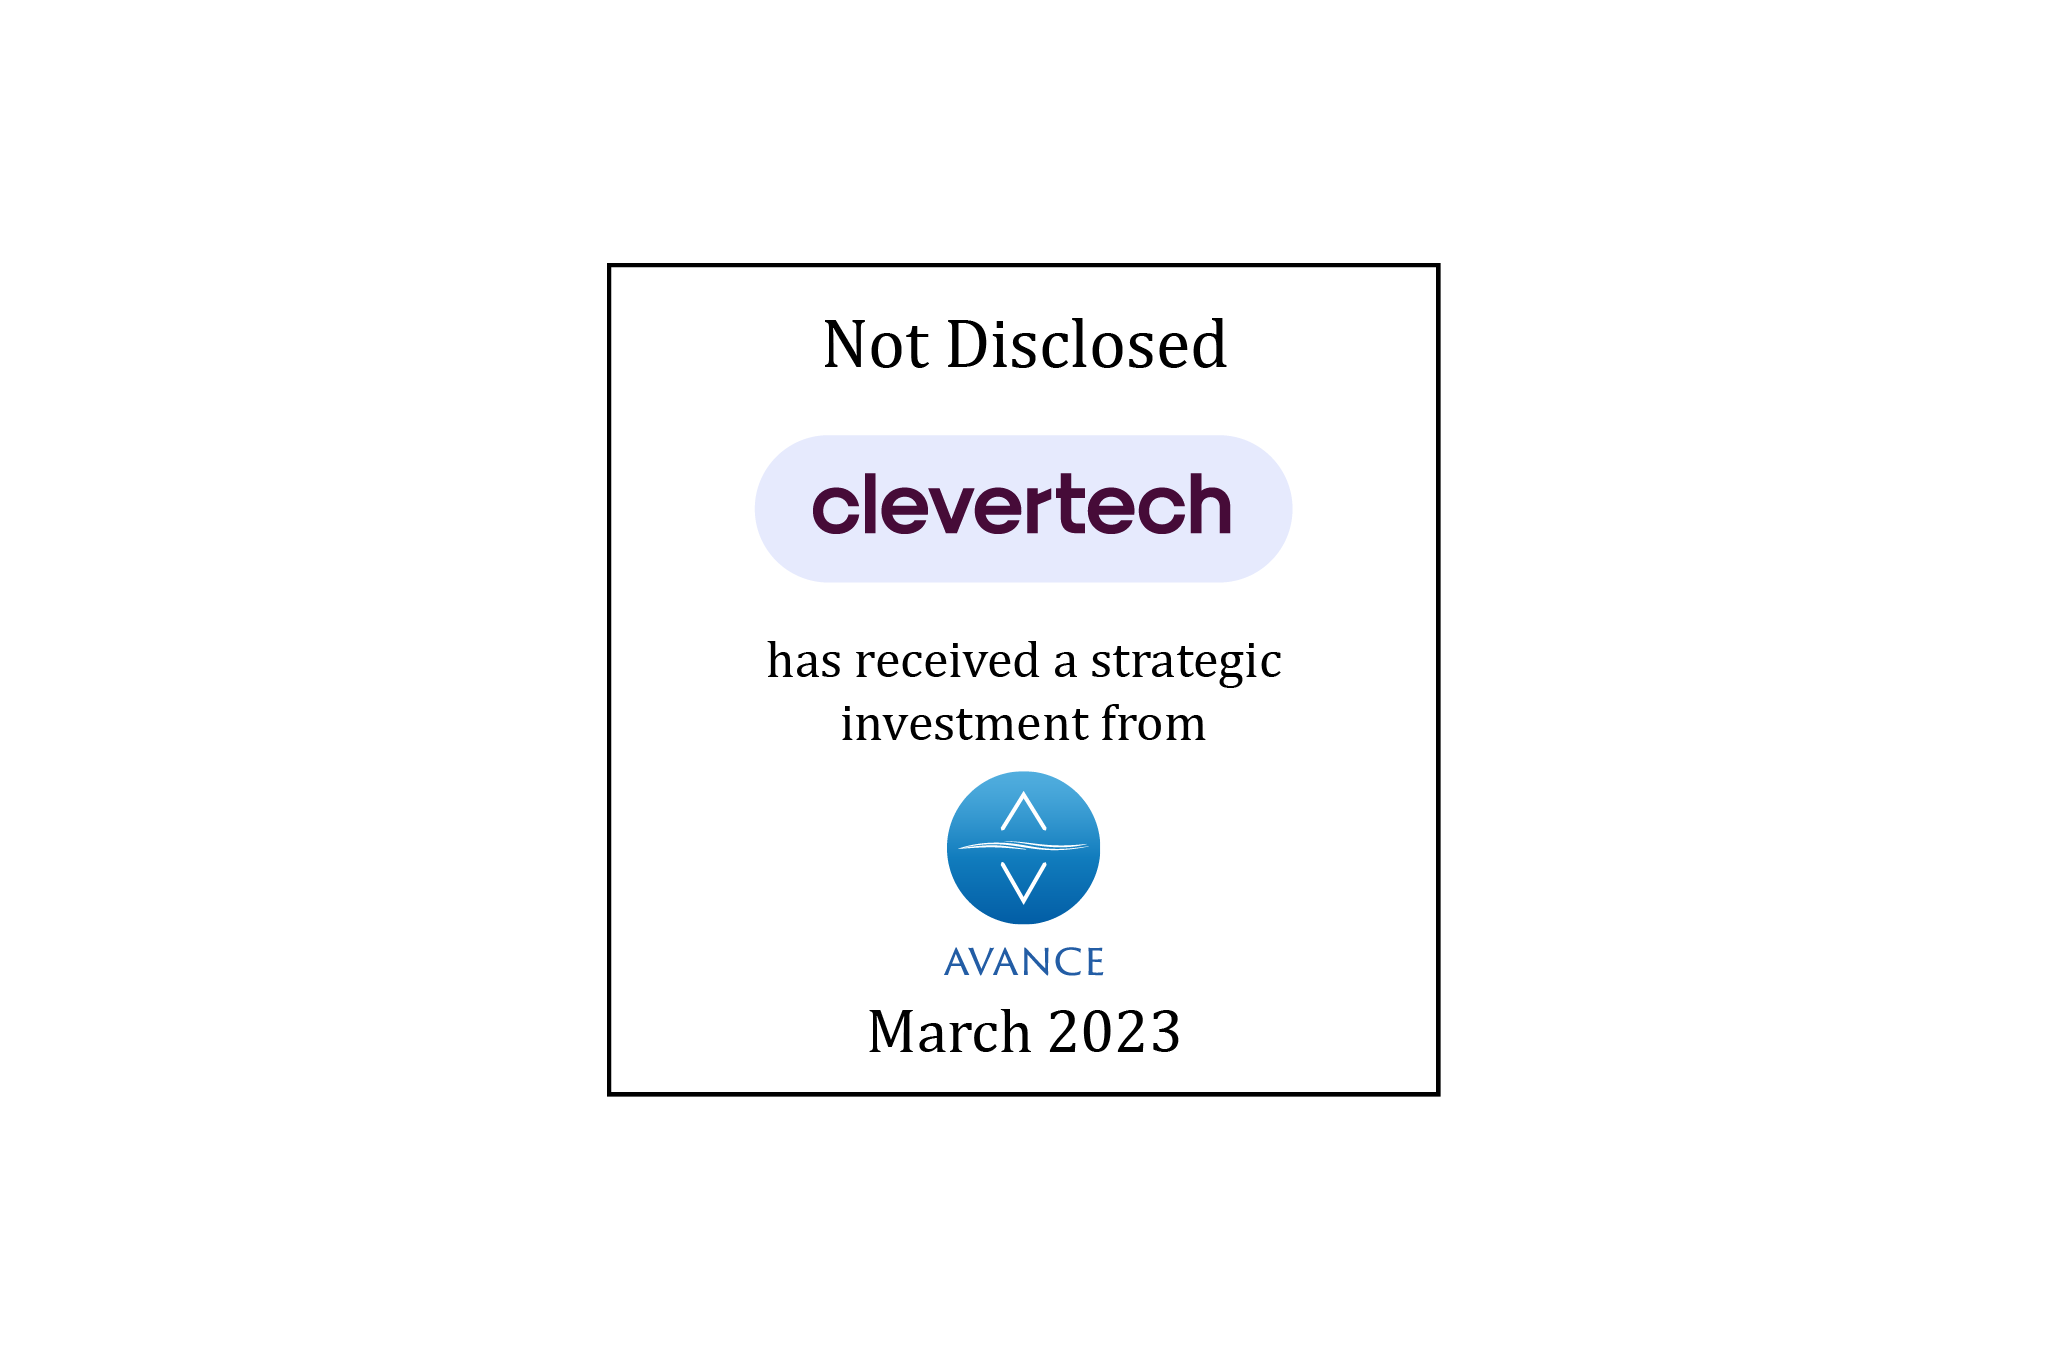 Not Disclosed | Clevertech (logo) Has Received a Strategic Investment From Avance Investment Management (logo) | March 2023